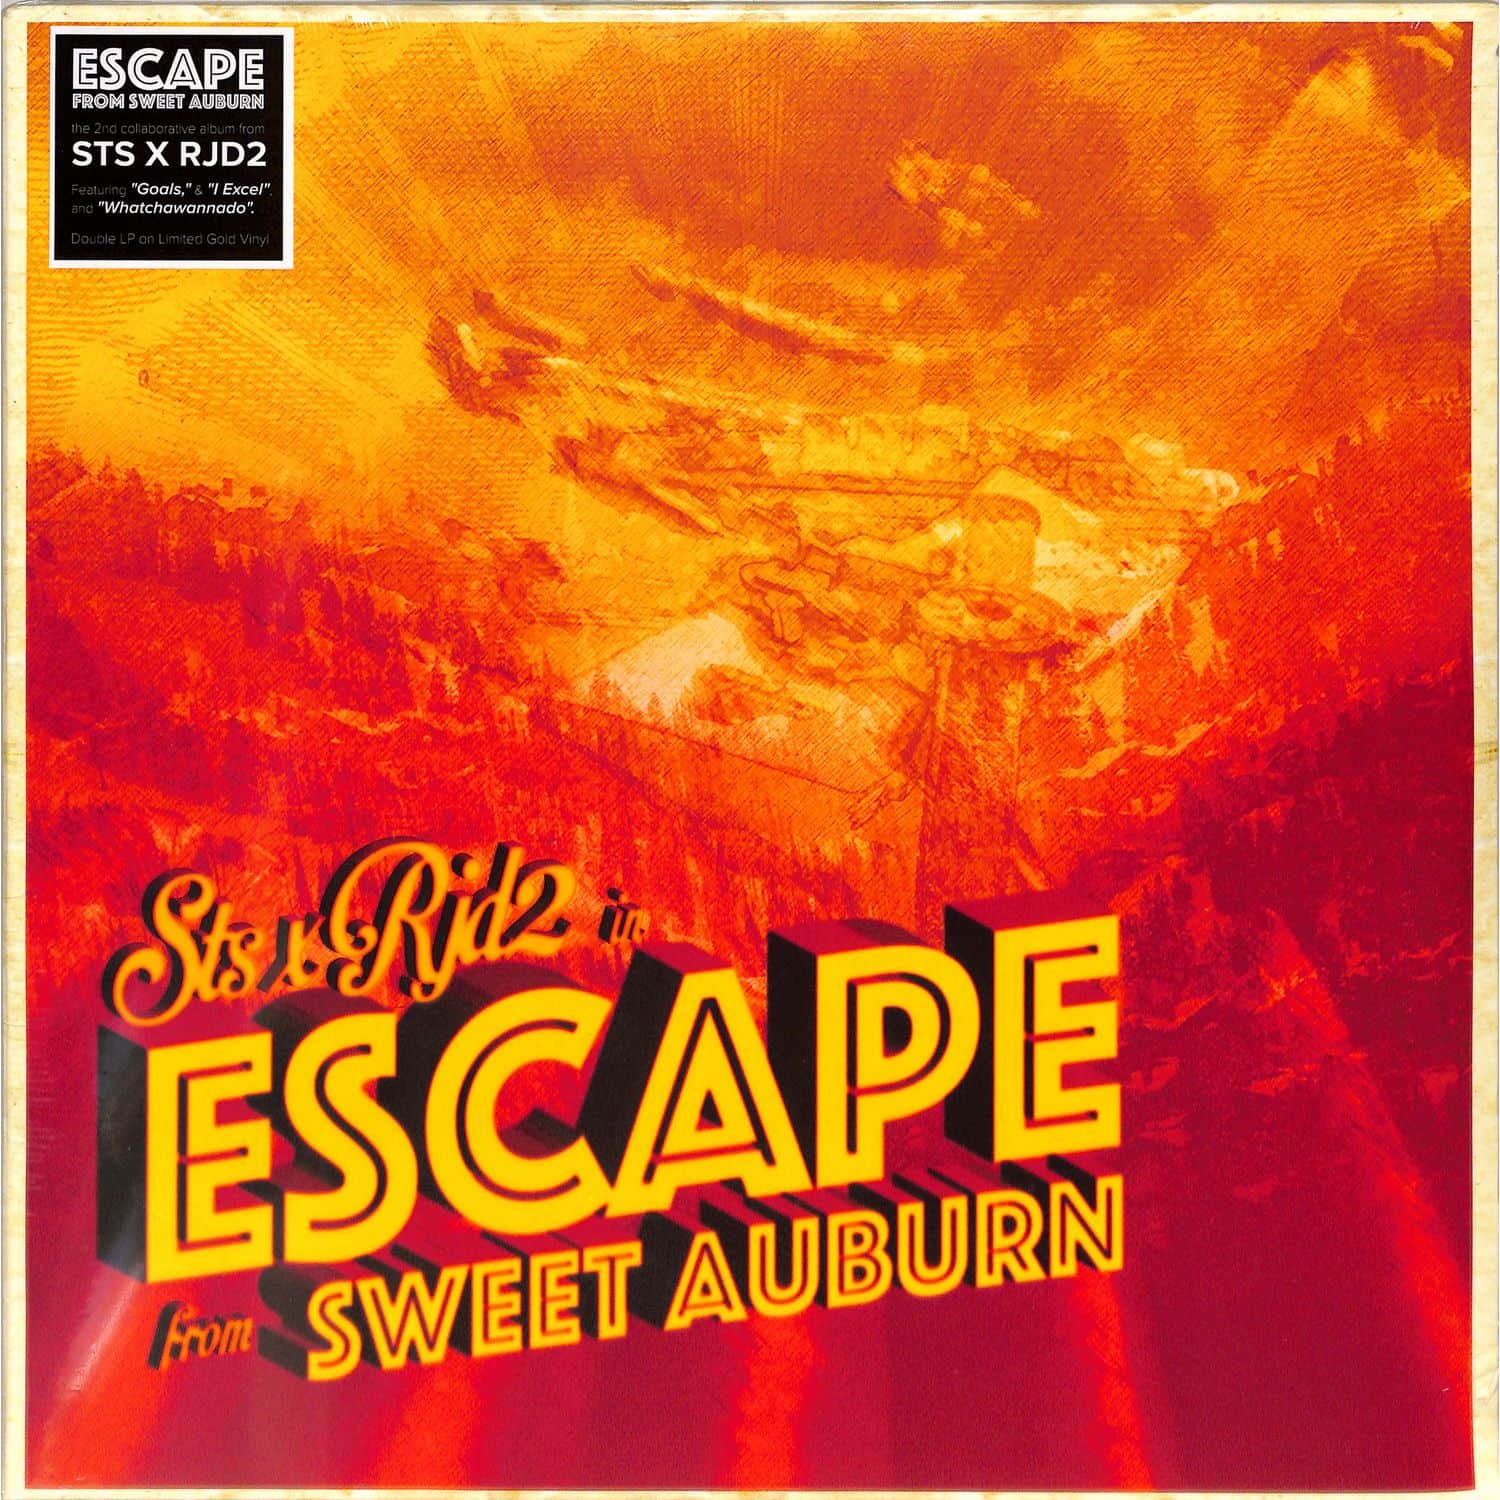 STS X RJD2 - ESCAPE FROM SWEET AUBURN 